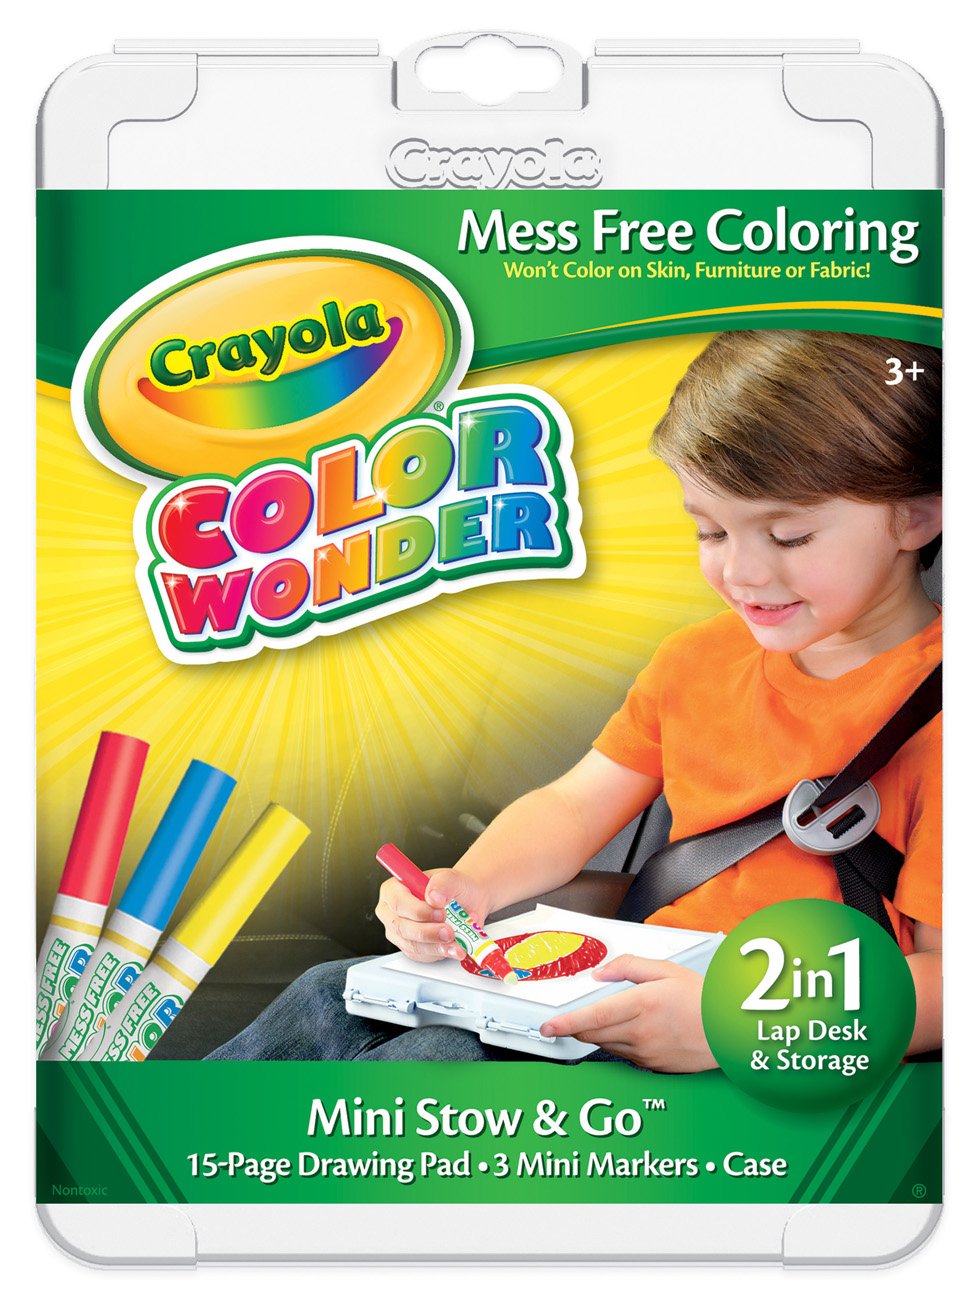 Review of Crayola Color Wonder - Fun Things To Do With Kids